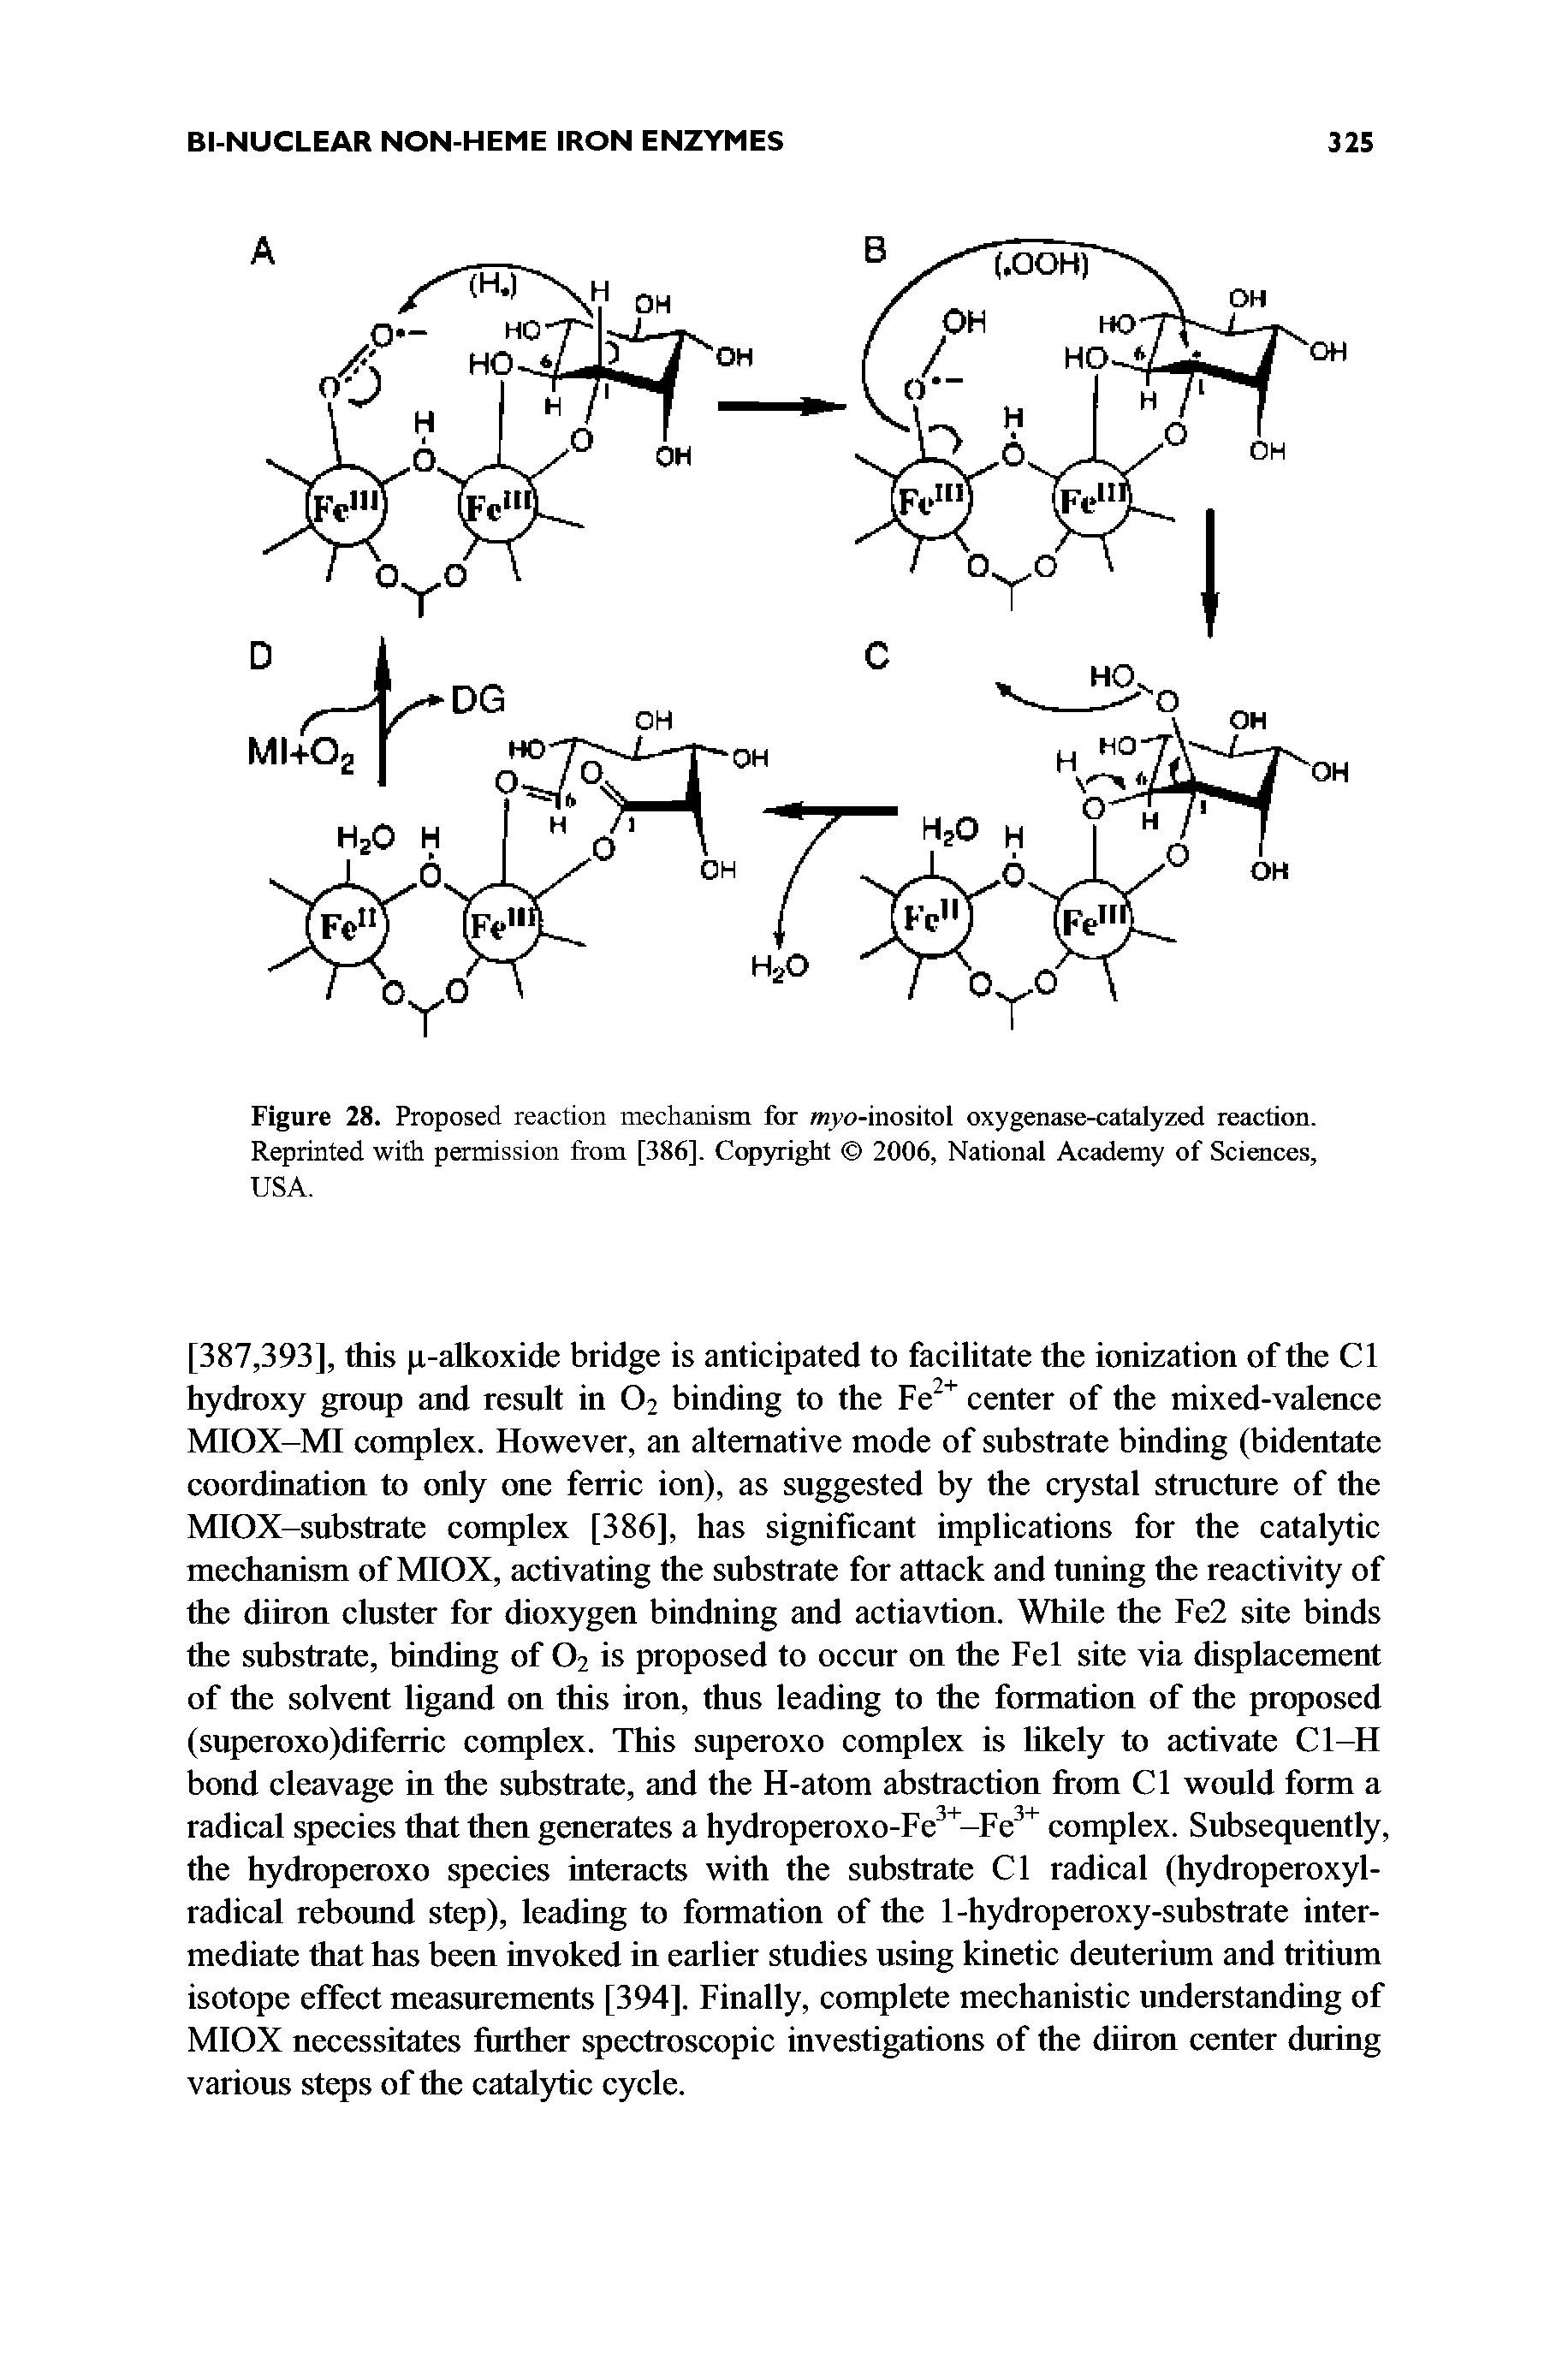 Figure 28. Proposed reaction mechanism for myo-inositol oxygenase-catalyzed reaction. Reprinted with permission from [386], Copyright 2006, Nationai Academy of Sciences,...